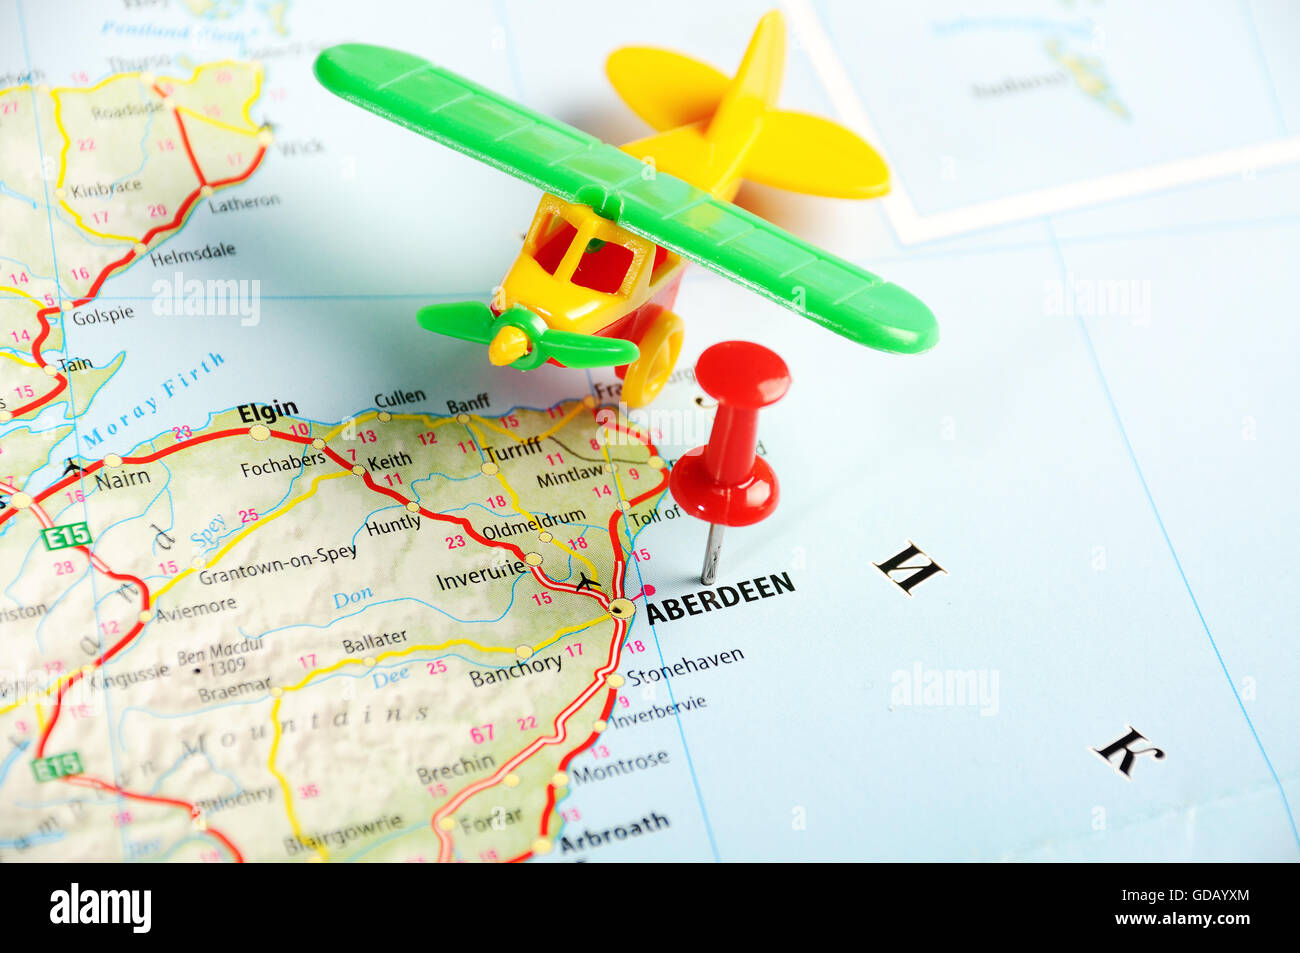 Aberdeen  Scotland  ,United Kingdom  map and  airplane  - Travel concept Stock Photo